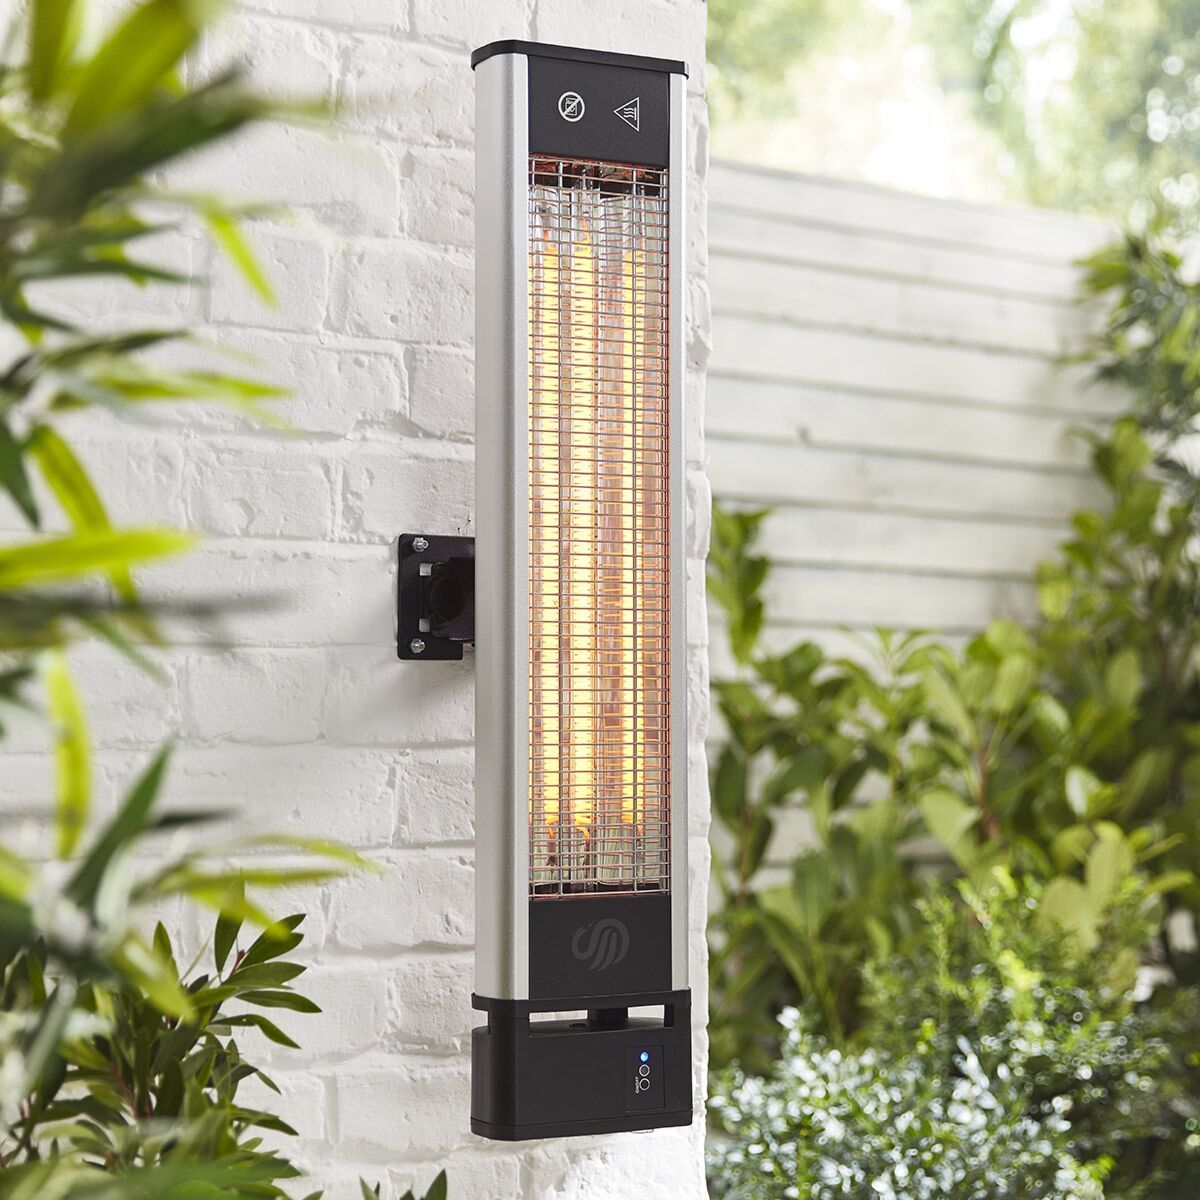 Best Patio Heaters To In The Uk For, Outdoor Electric Heater Reviews